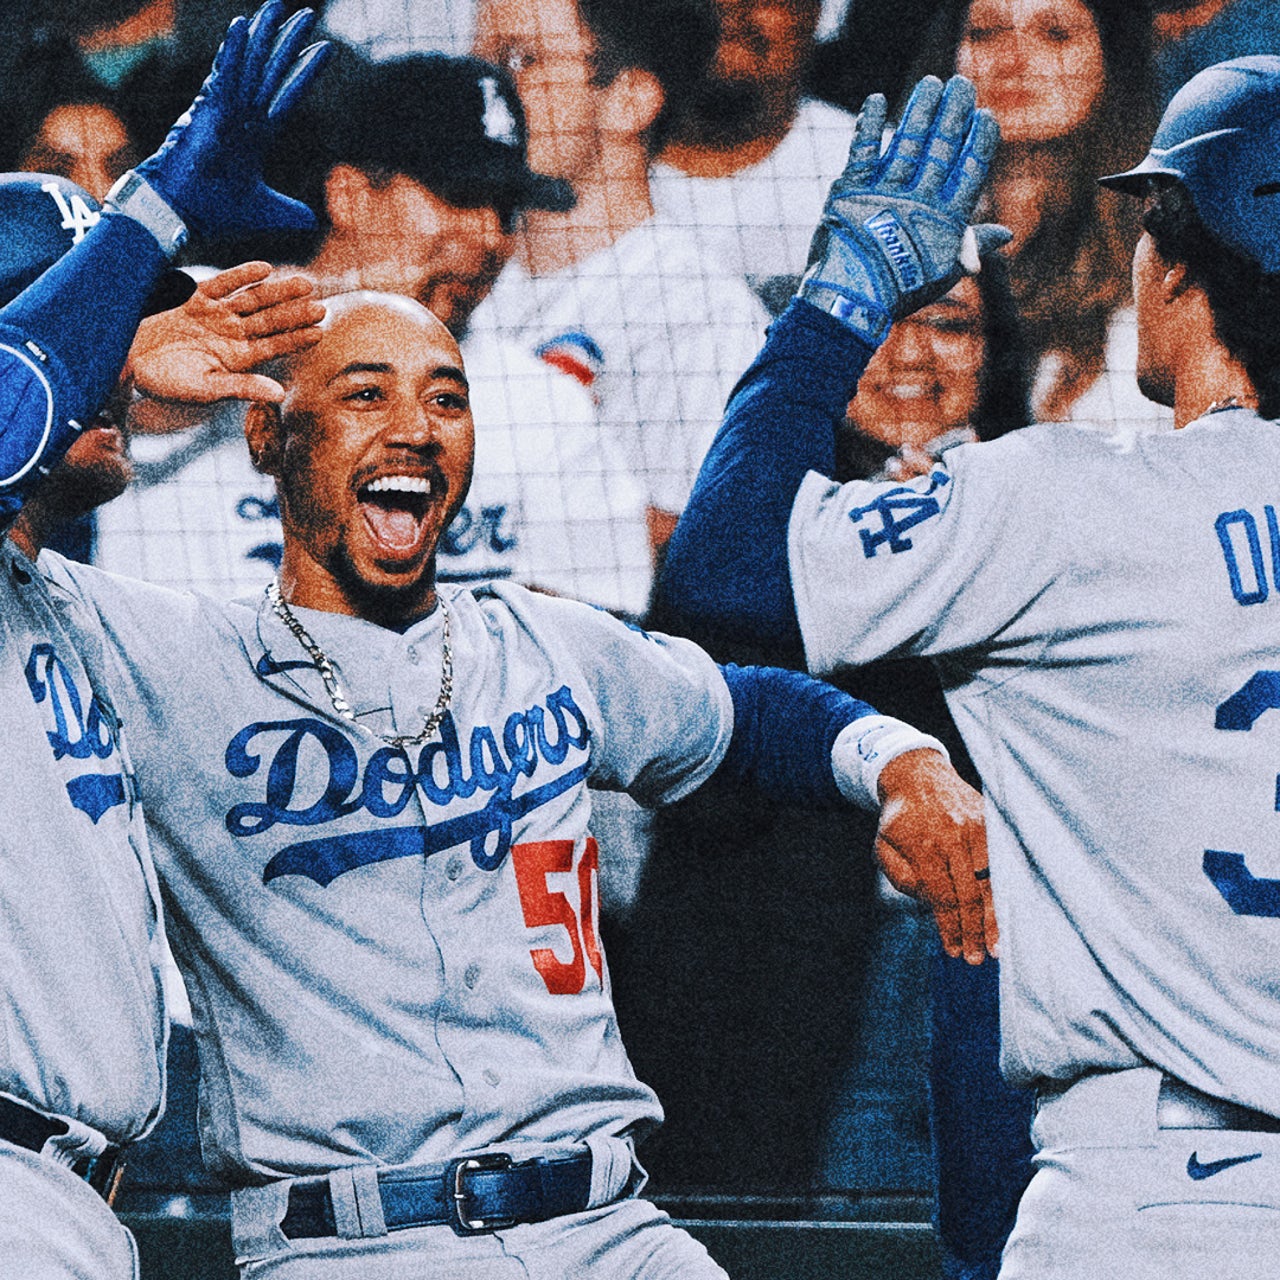 LA Kings - We're still celebrating that Los Angeles Dodgers win! Celebrate  with us by purchasing your tickets to Dodgers Night at the LA Kings game  now and you'll go home with